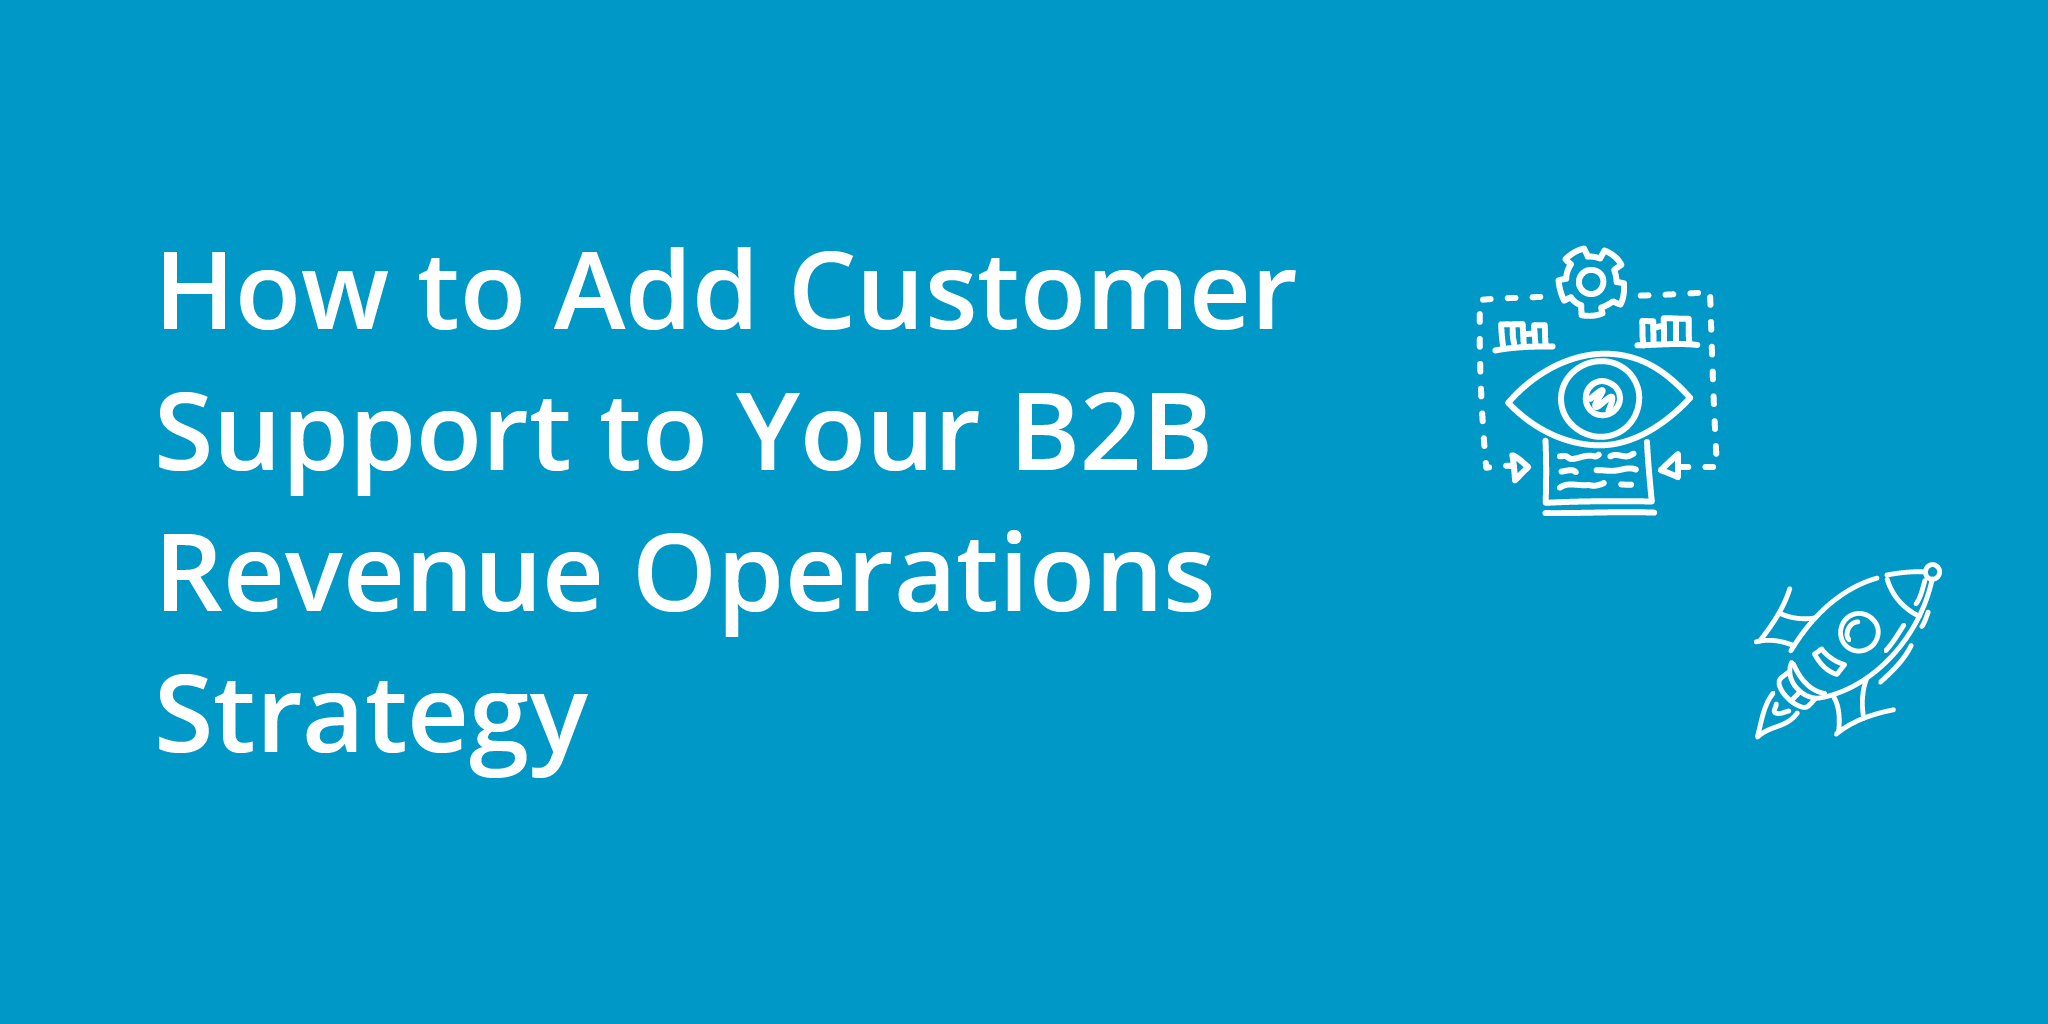 How to Add Customer Support to Your B2B Revenue Operations Strategy